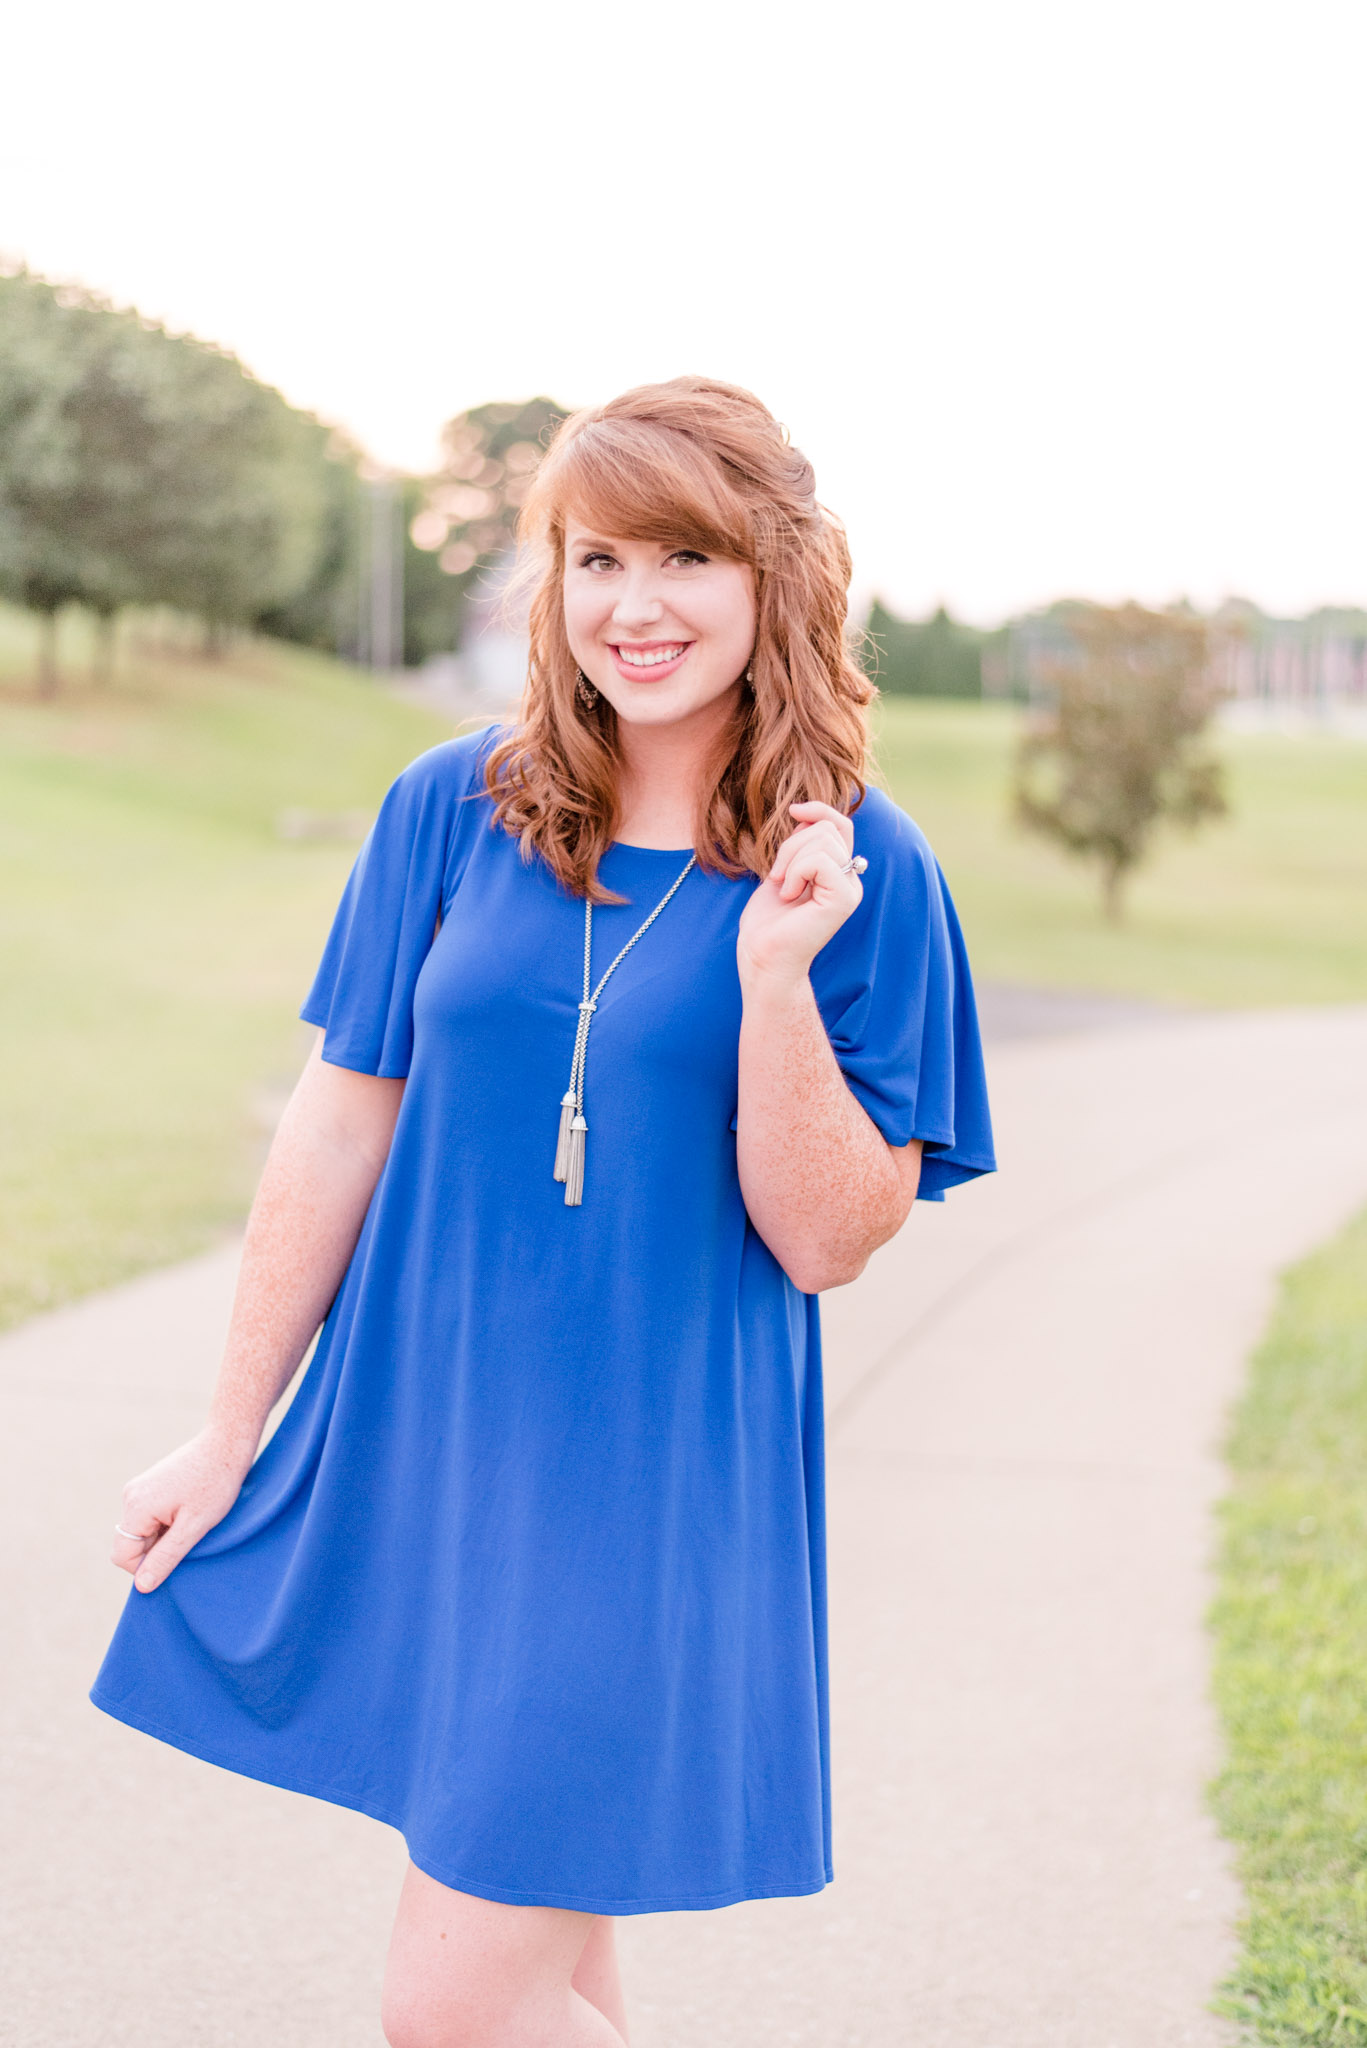 Red-headed model in blue dress smiles and poses for camera